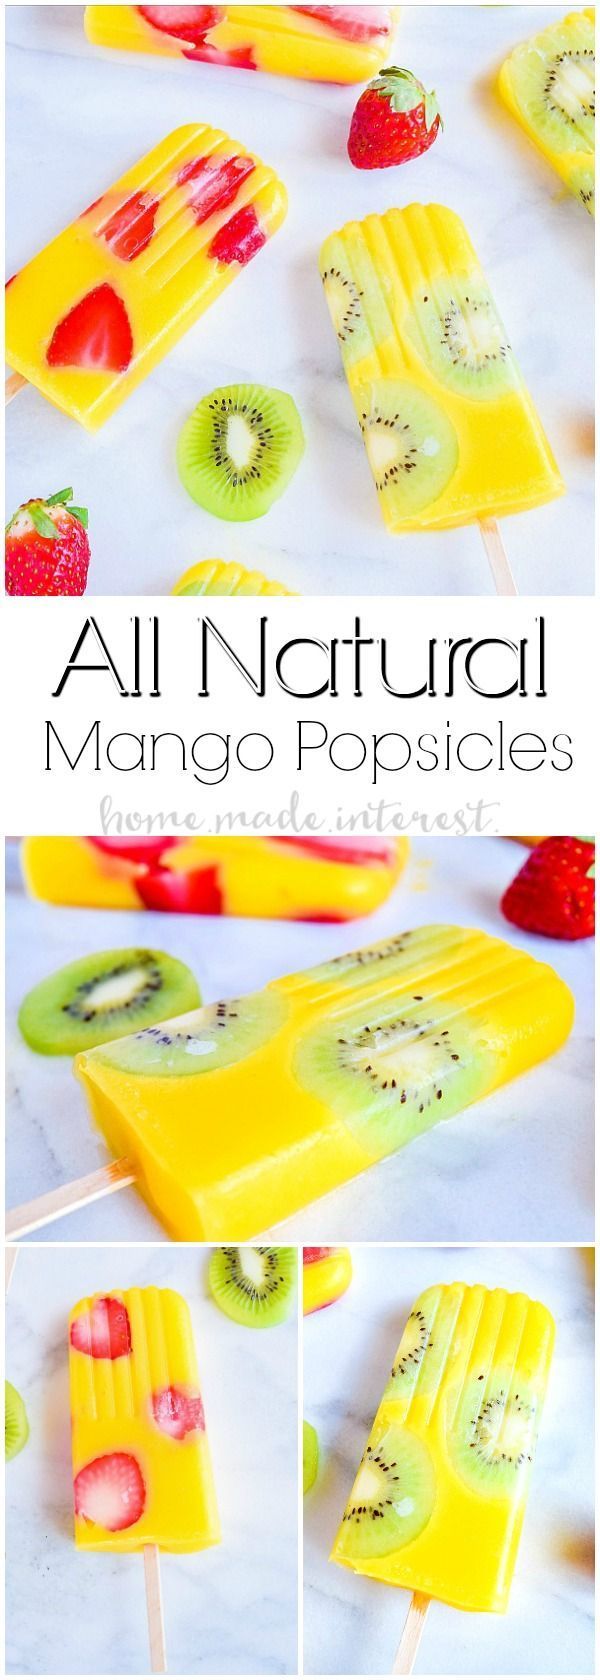 All Natural Mango Popsicles | Fruit popsicles are a great way to get your kids to eat more fruits and to stay hydrated in the